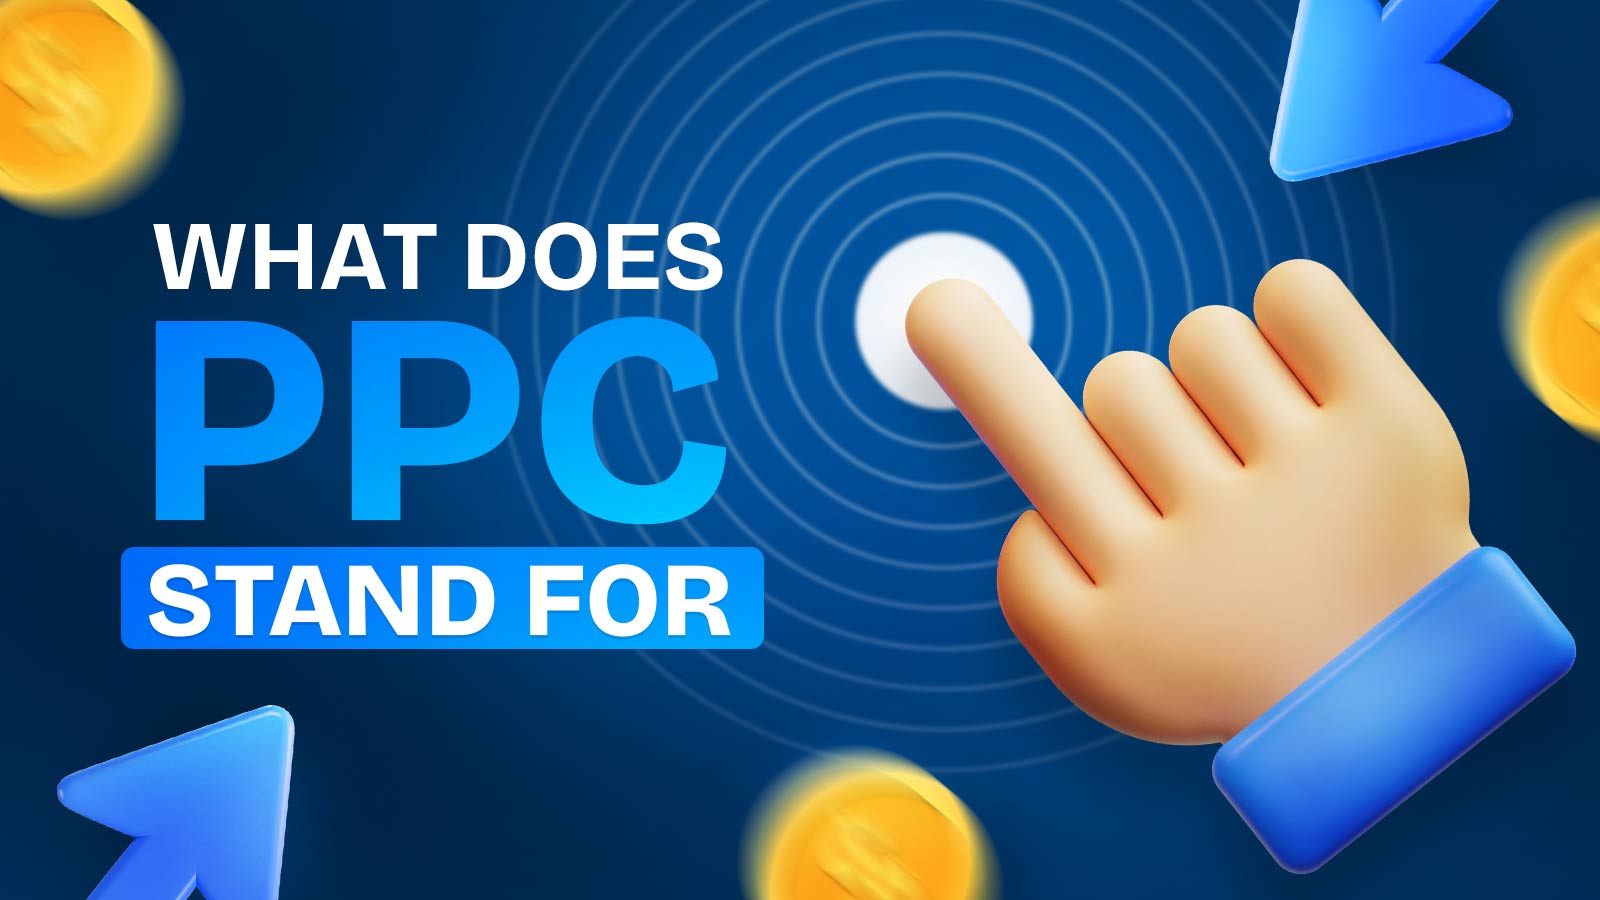 What Does PPC Stand For In Marketing? How To Do PPC?